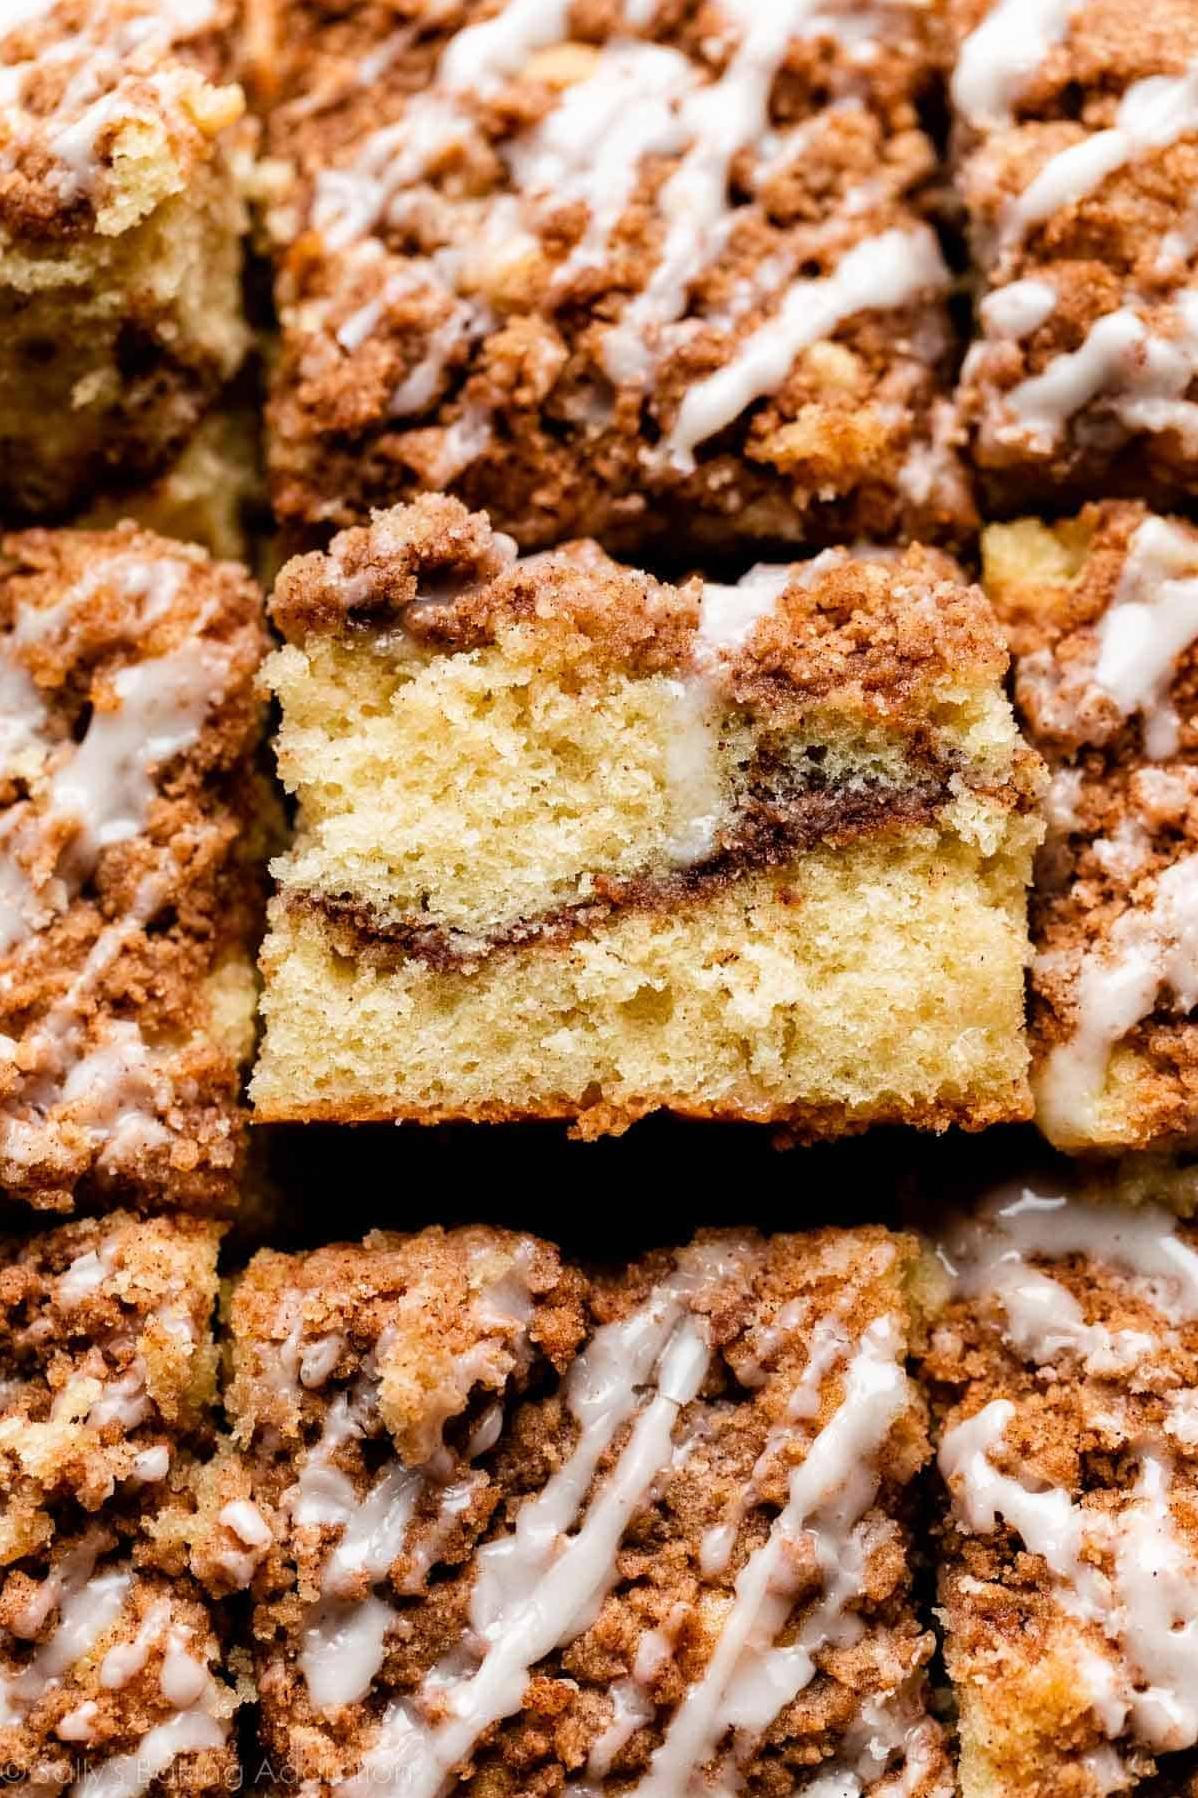  This cake is perfect for breakfast, brunch, or a mid-day snack